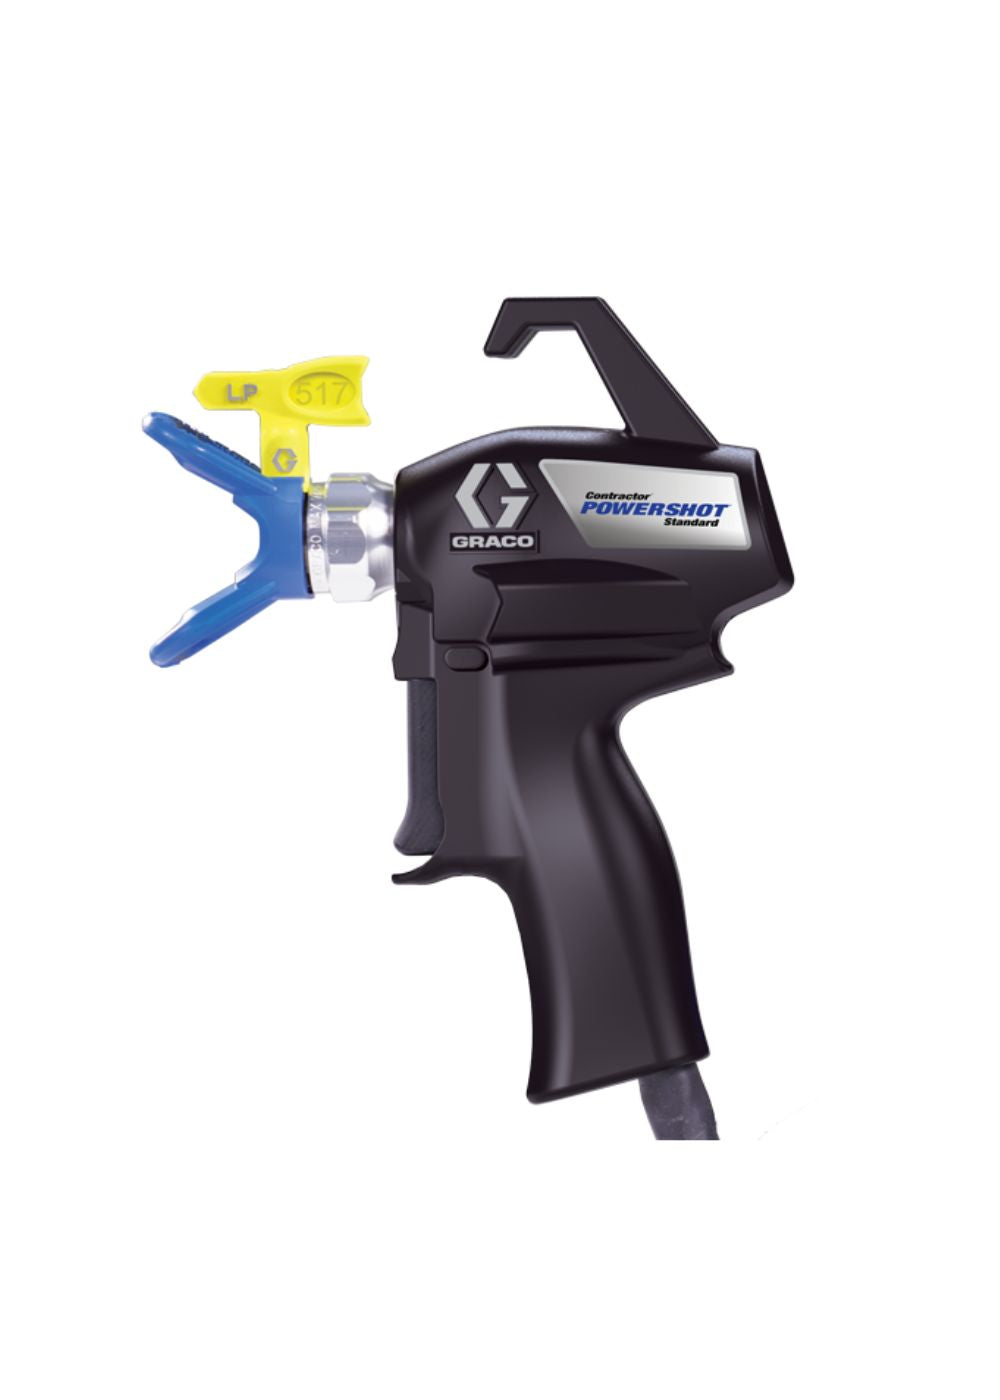 Instant Response Electric Powered Gun | Virtually eliminates splits while reducing sprayer fatigue due to it's industry's lightest trigger pull. The smallest, lightest airless gun ever built.